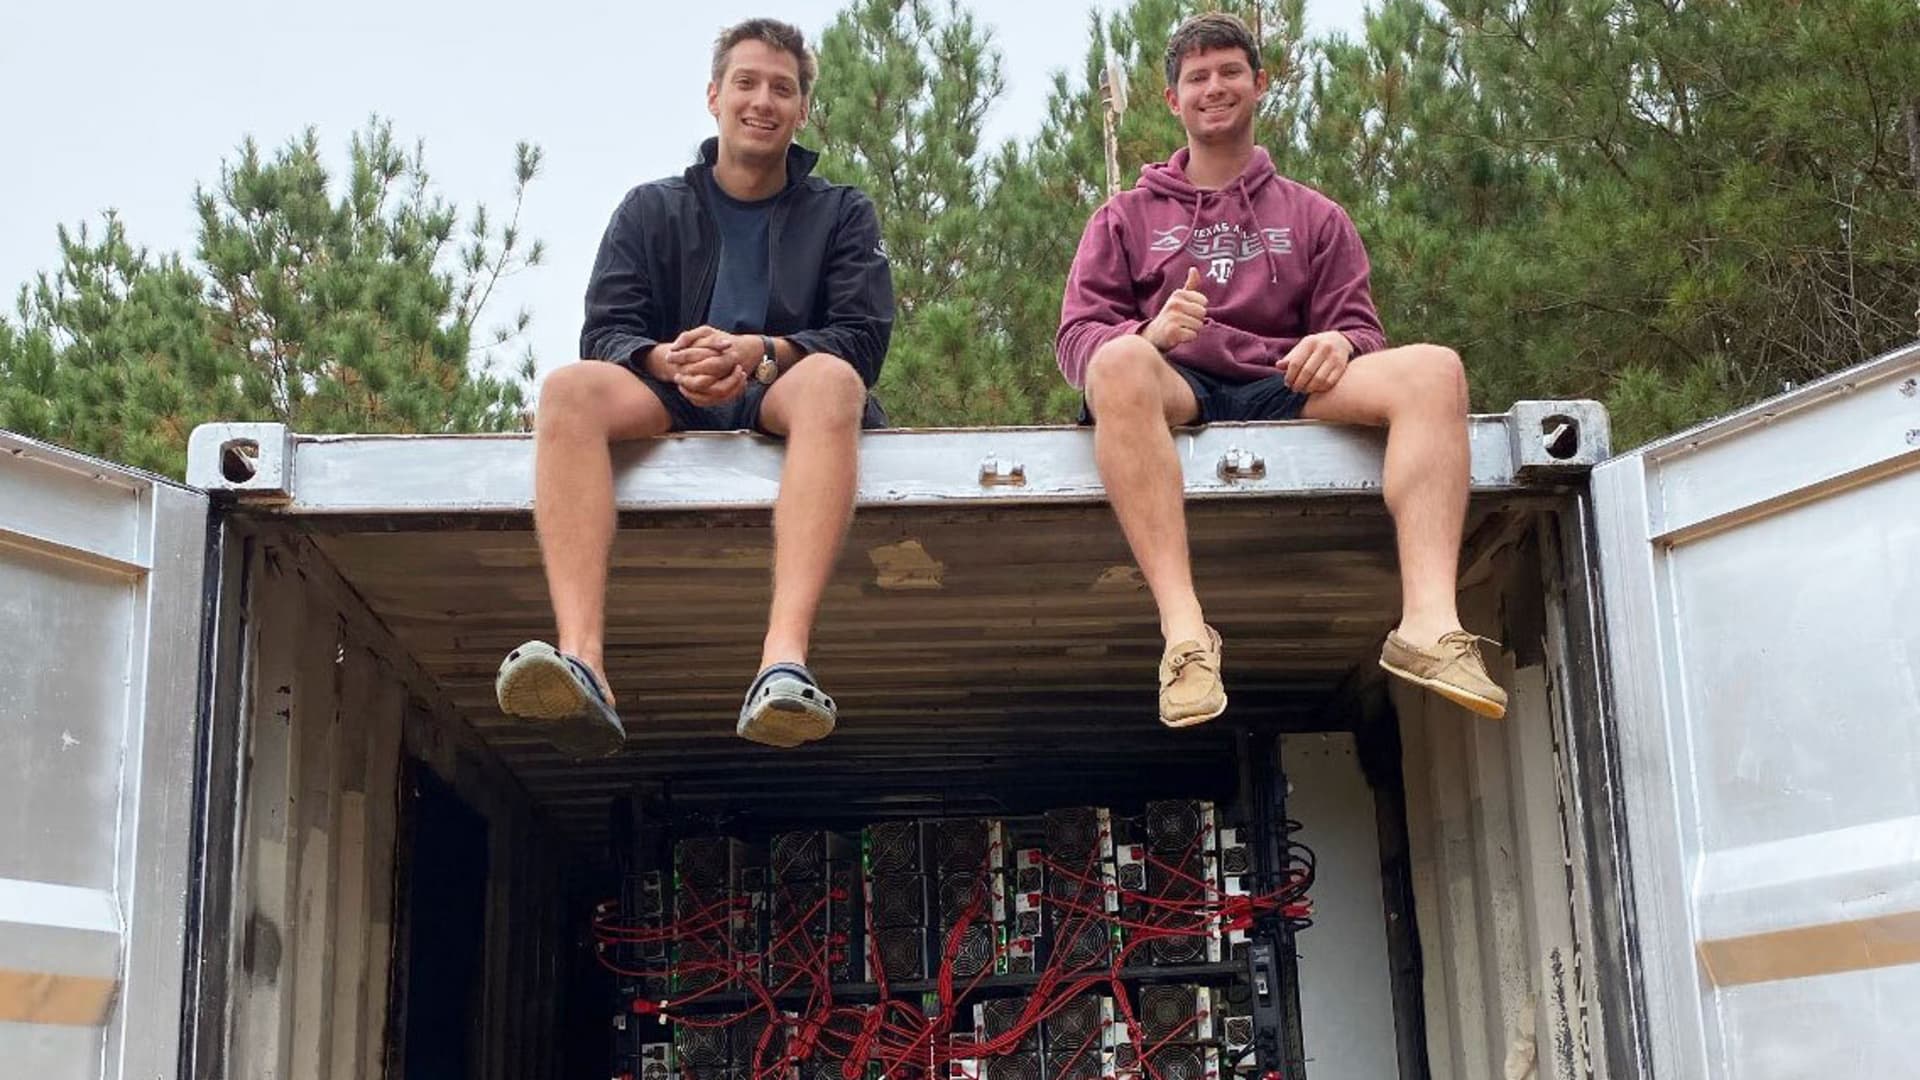 Brent Whitehead and Matt Lohstroh at the first unit they built in east Texas.